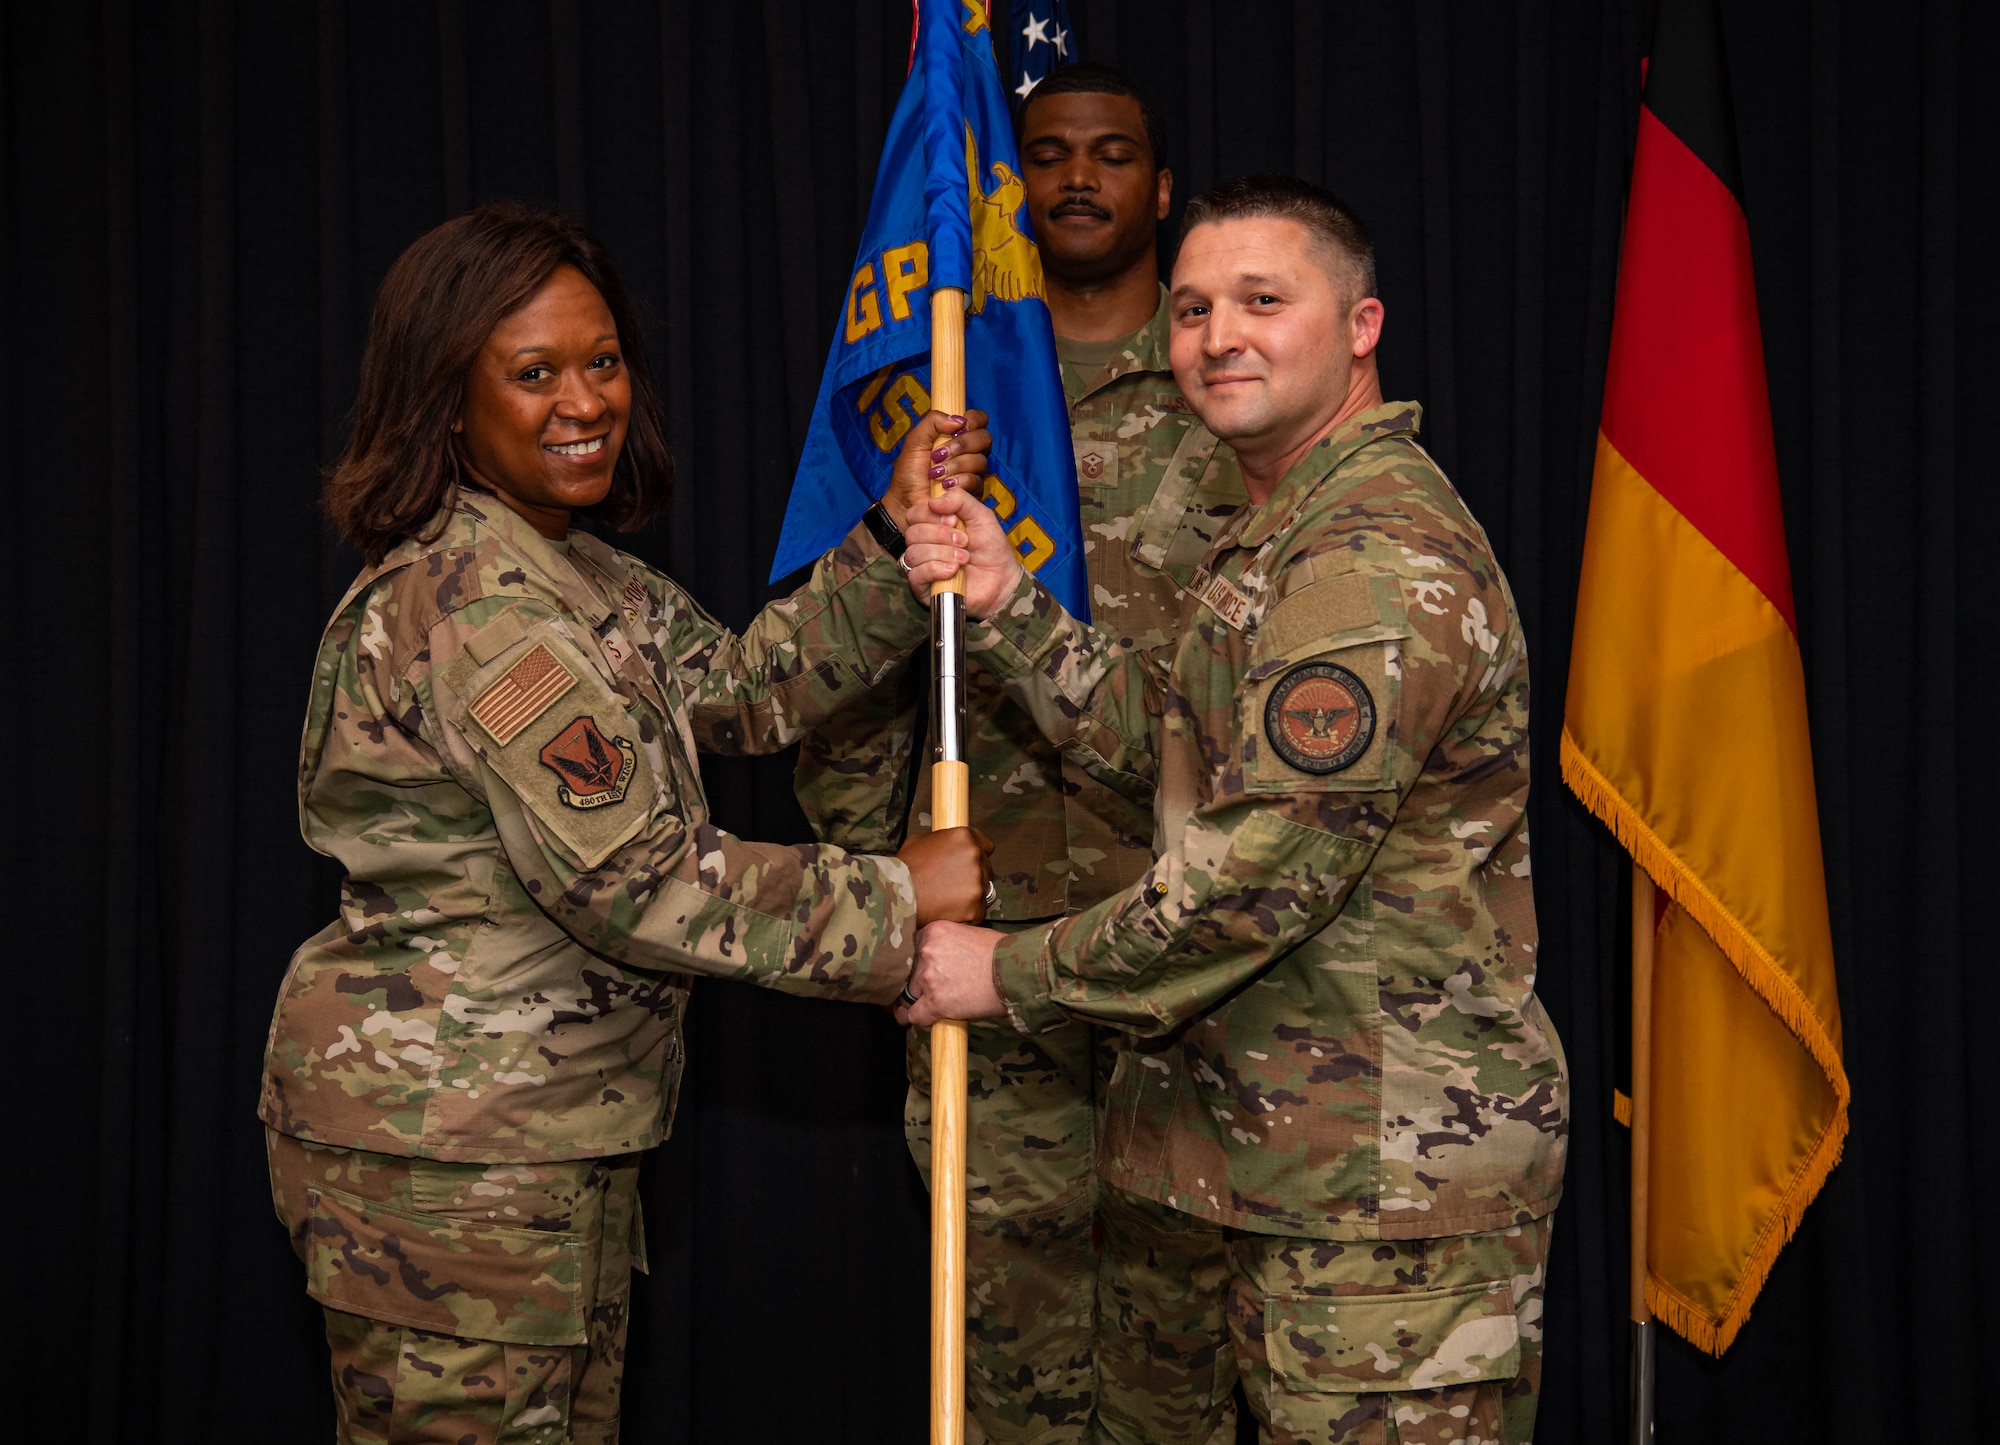 U.S. Air Force Col. Kayle Stevens, 480th Intelligence, Surveillance and Reconnaissance Wing commander (left), Col Creighton Mullins, 693rd ISR Group commander (right), pose for a photo during a change of command ceremony at Ramstein Air Base, Germany, May 6, 2022. Mullins assumed command of the group and its 900 Airmen, prepared to direct support of multiple combatant commands across a full range of military operations.